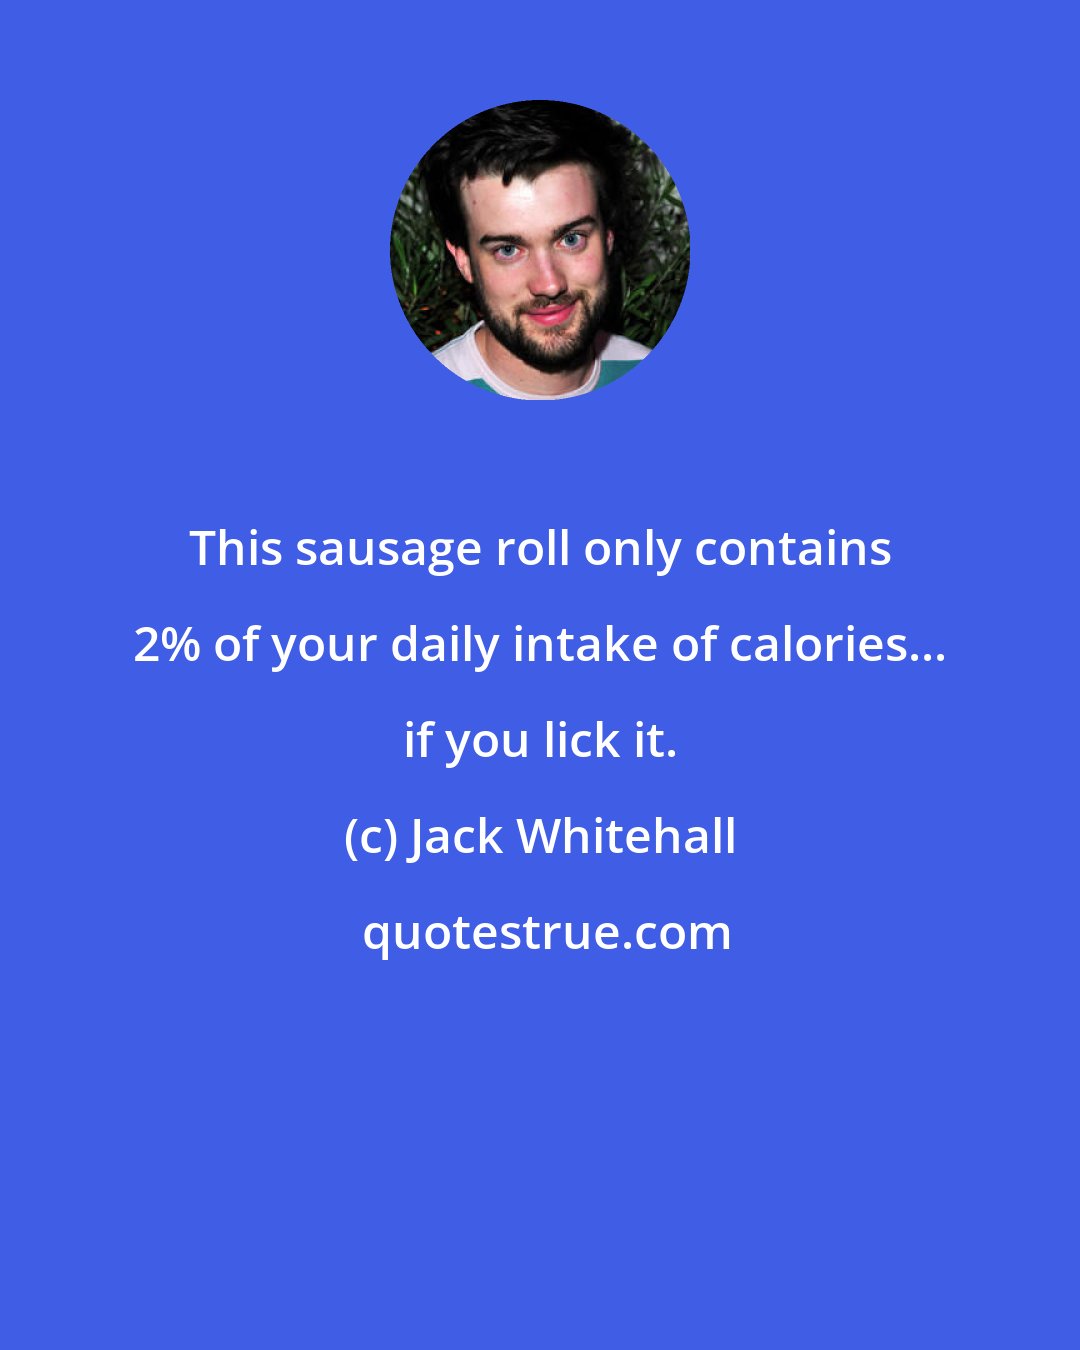 Jack Whitehall: This sausage roll only contains 2% of your daily intake of calories... if you lick it.